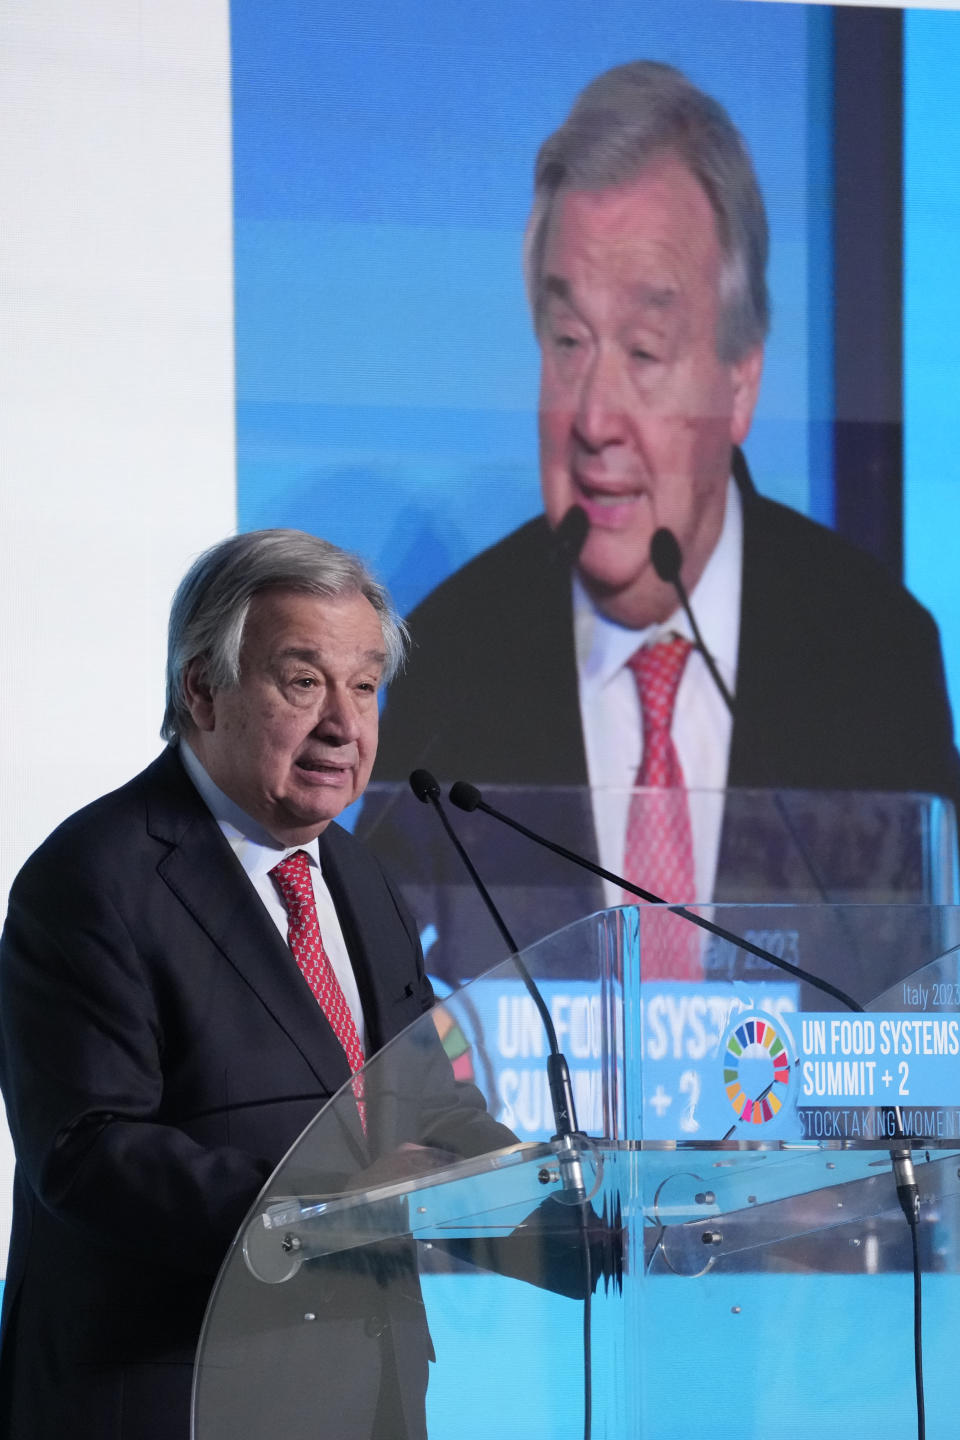 UN Secretary General Antonio Guterres addresses the assembly during the opening session of a three-day U.N. Food and Agriculture Agency's summit on food systems in Rome, Monday, July 24, 2023. (AP Photo/Andrew Medichini)